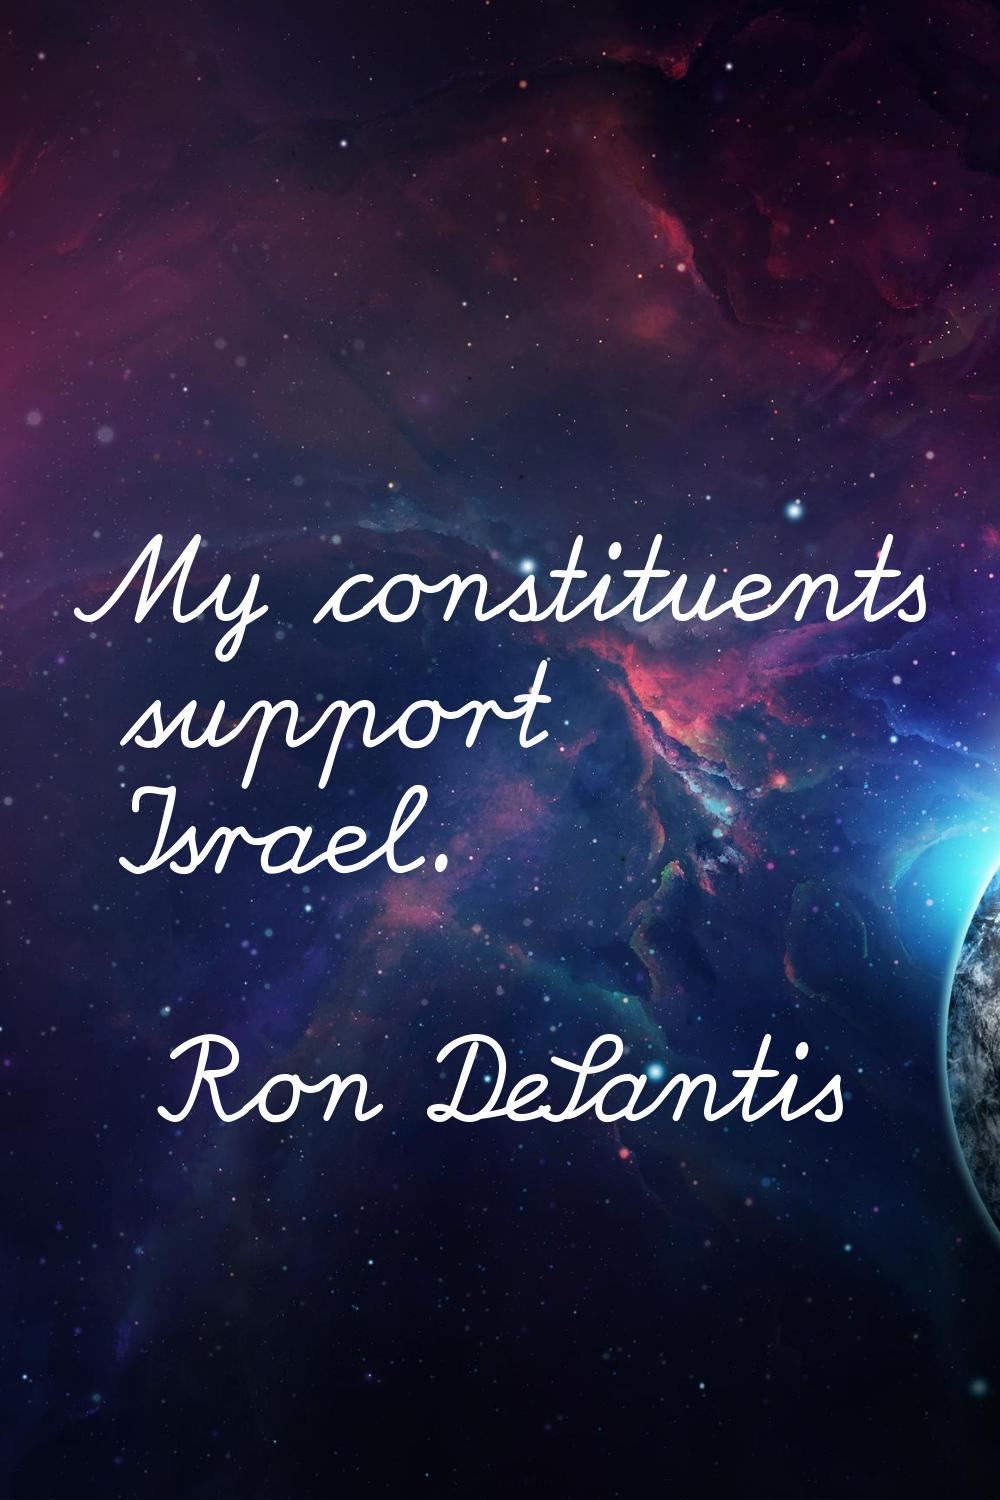 My constituents support Israel.